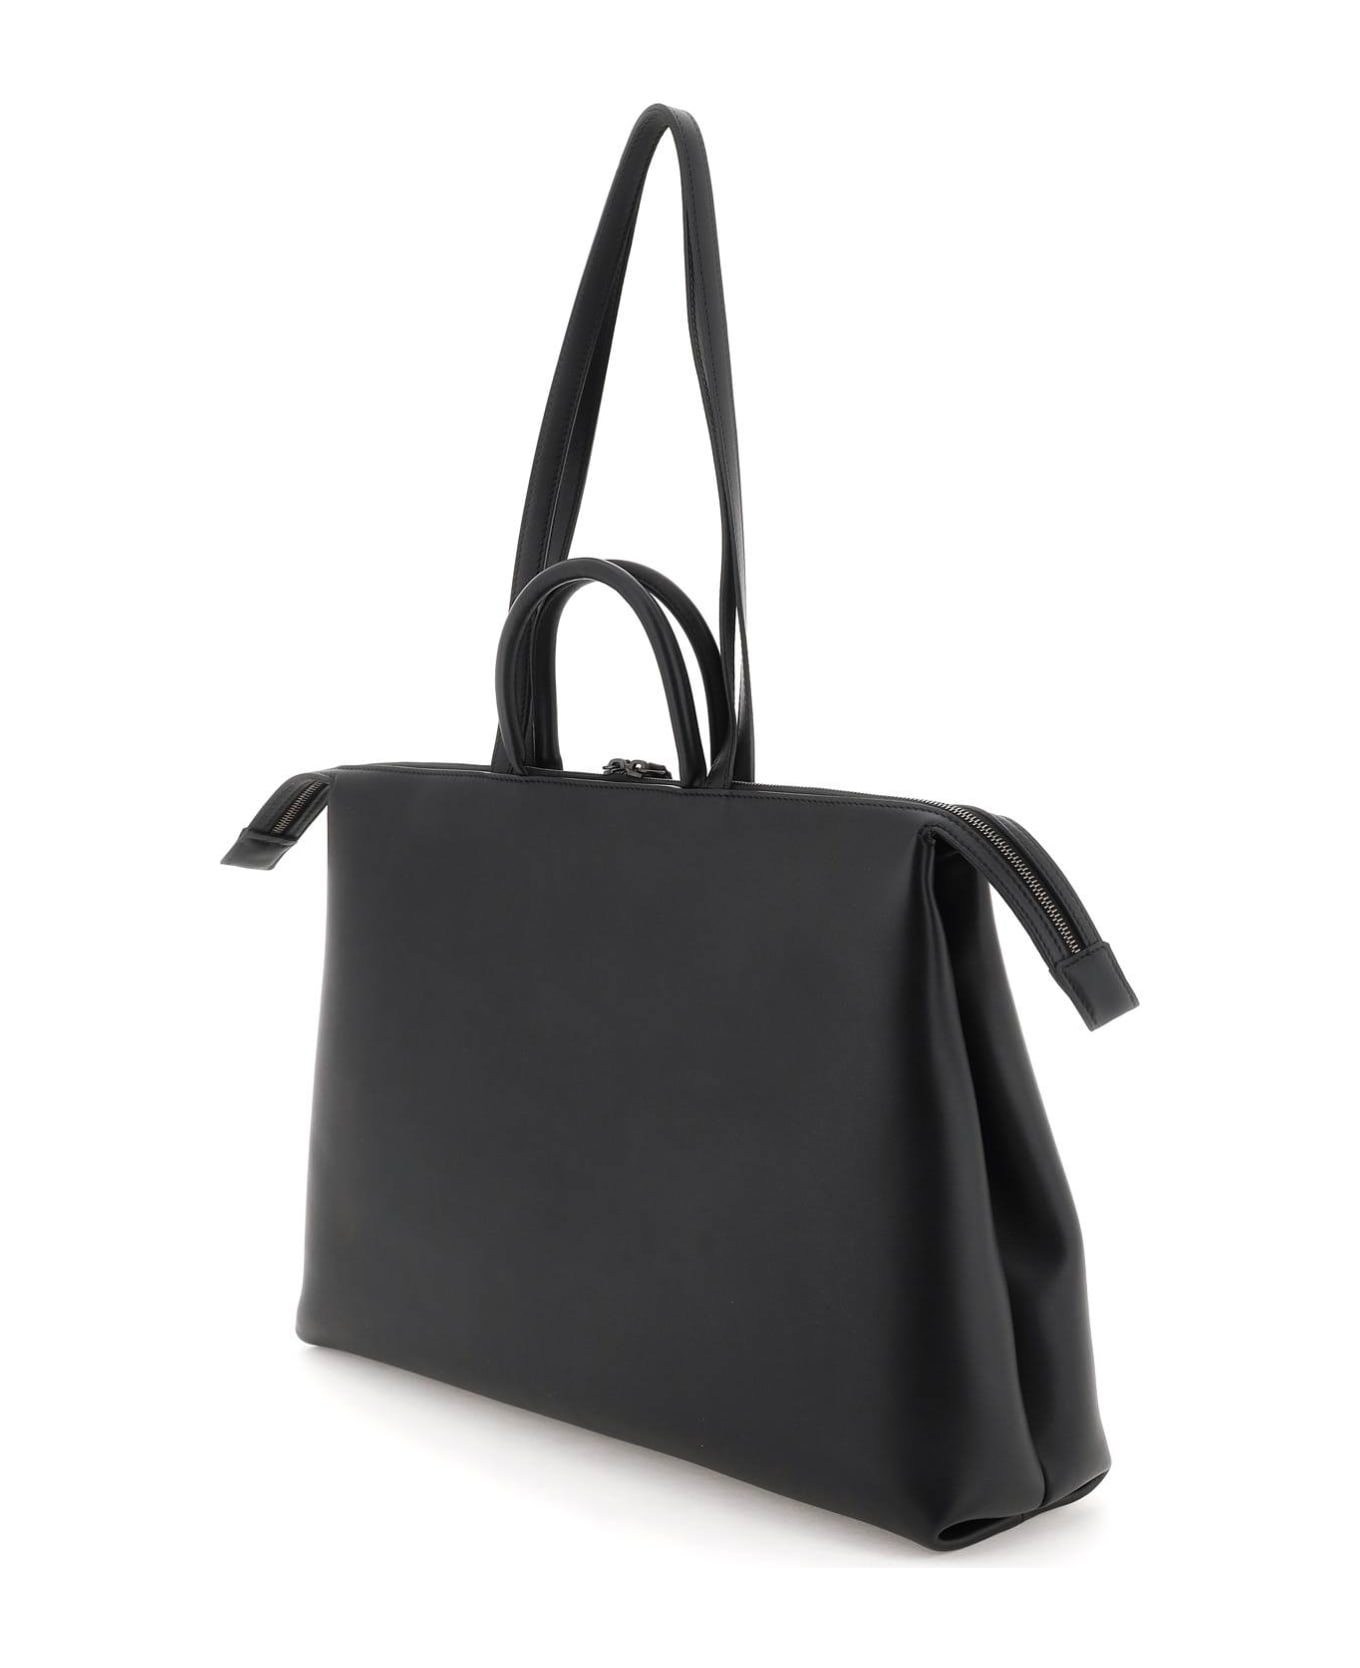 Marsell '4 In Orizzontale' Shoulder Bag - NERO (Black) トートバッグ